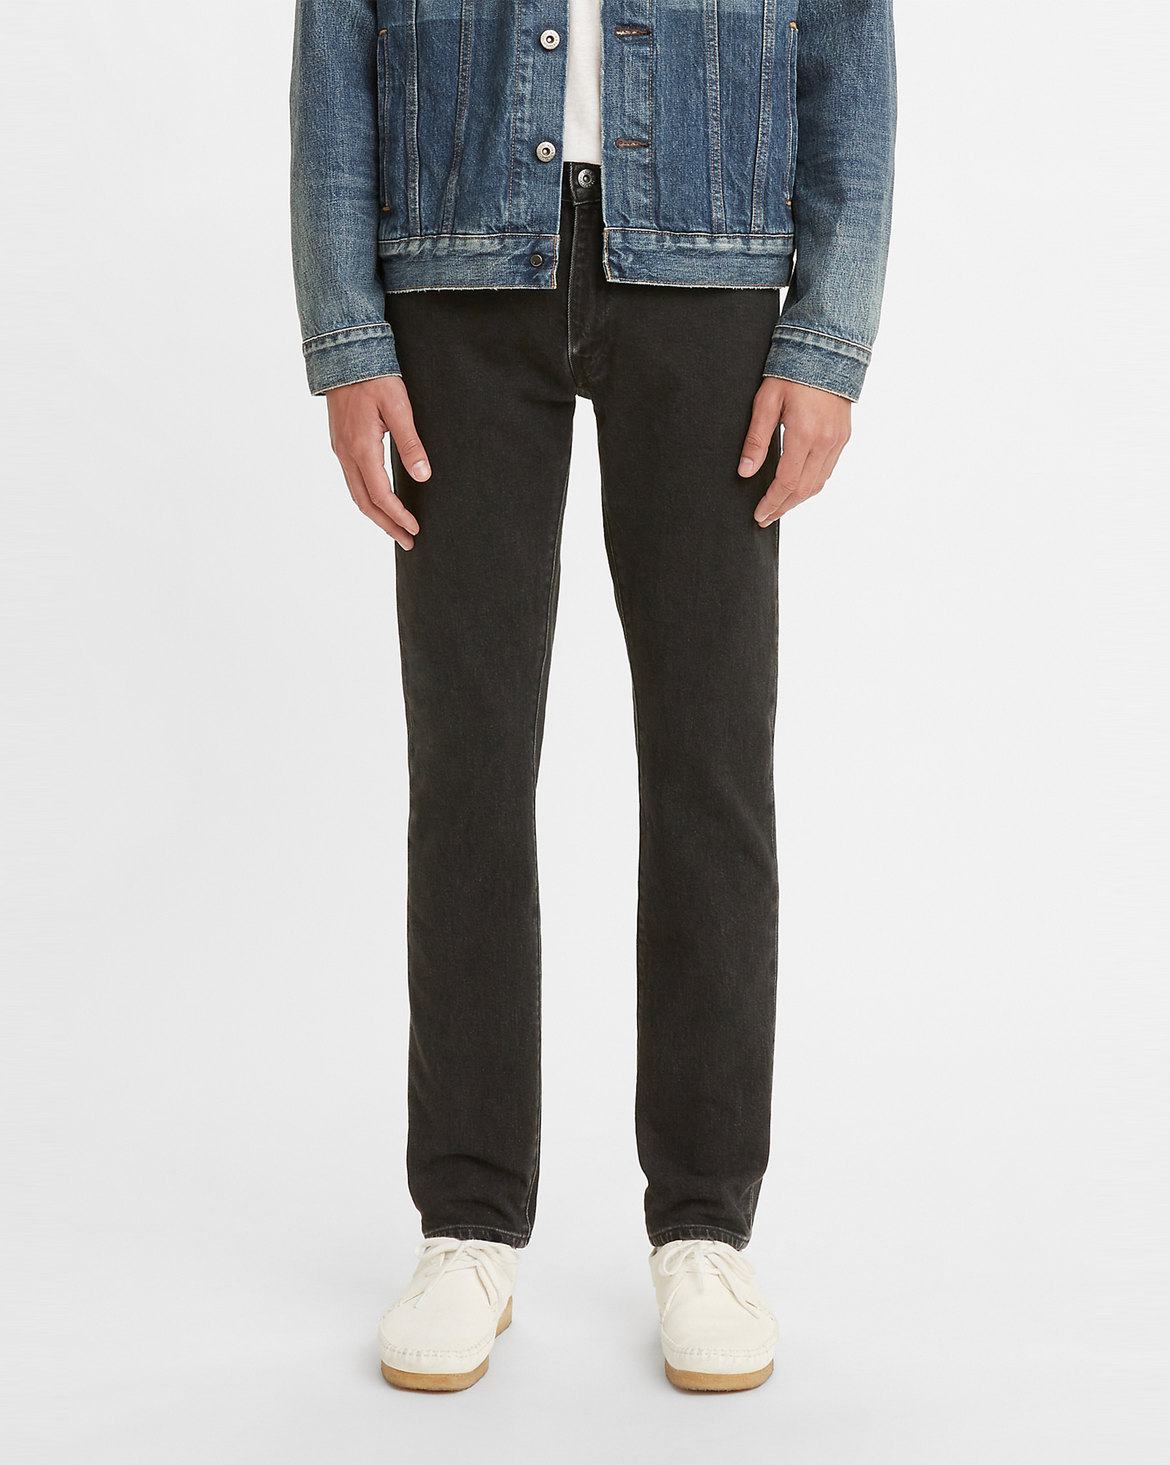 Levi's® Made & Crafted® 511™ Slim Fit Jeans | Levi